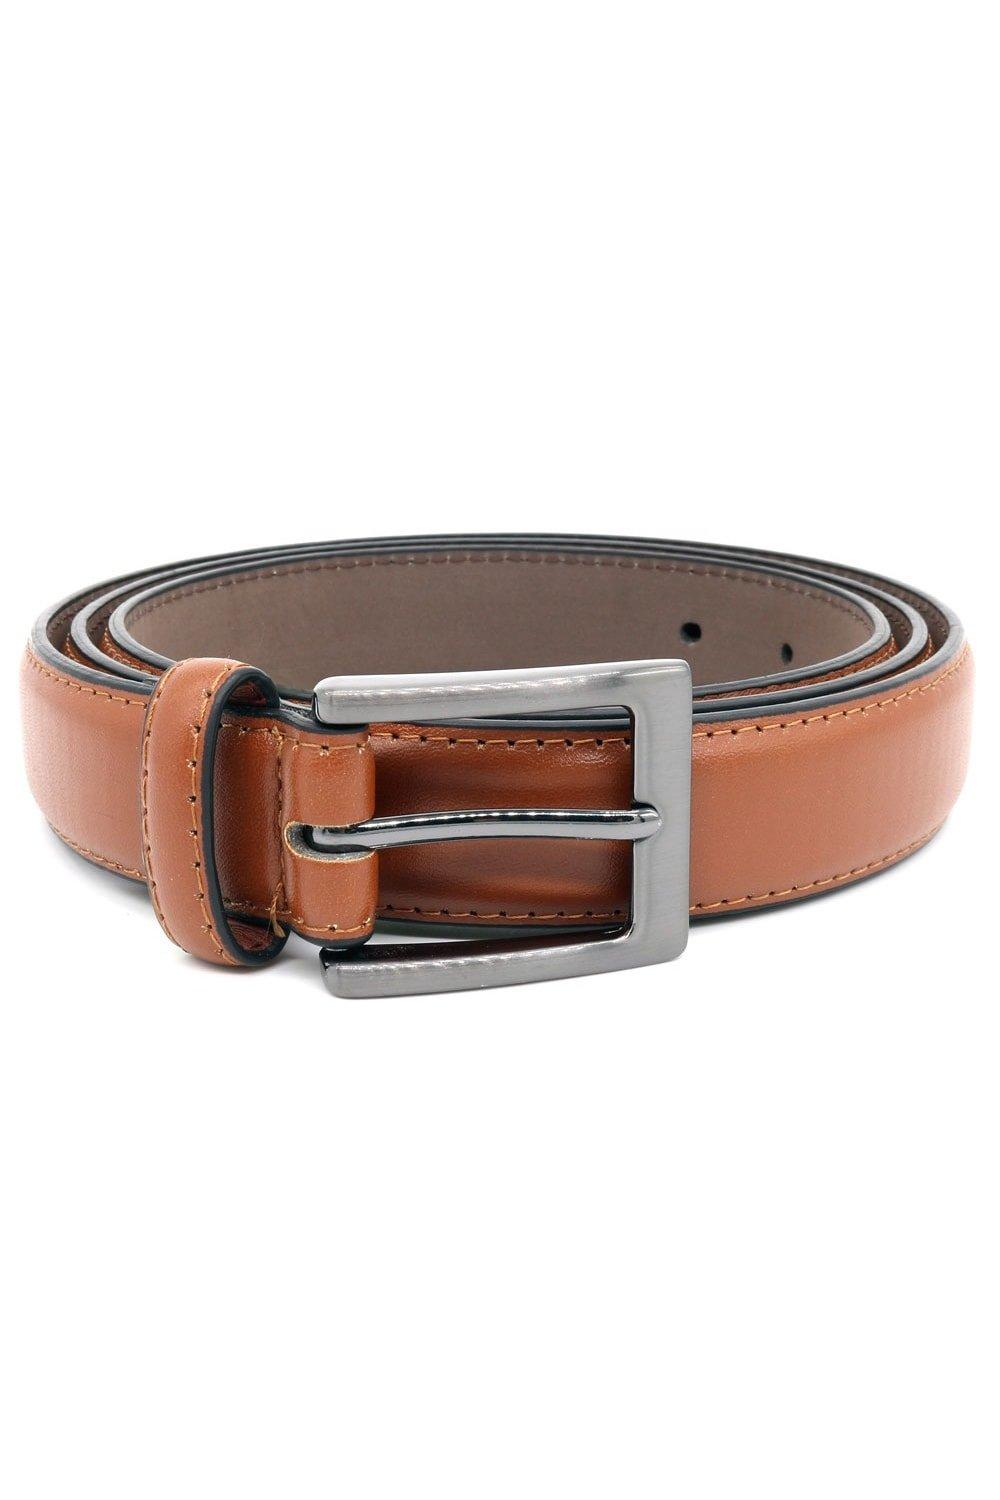 Marino’s Men Genuine Leather Dress Belt with Single Prong Buckle 